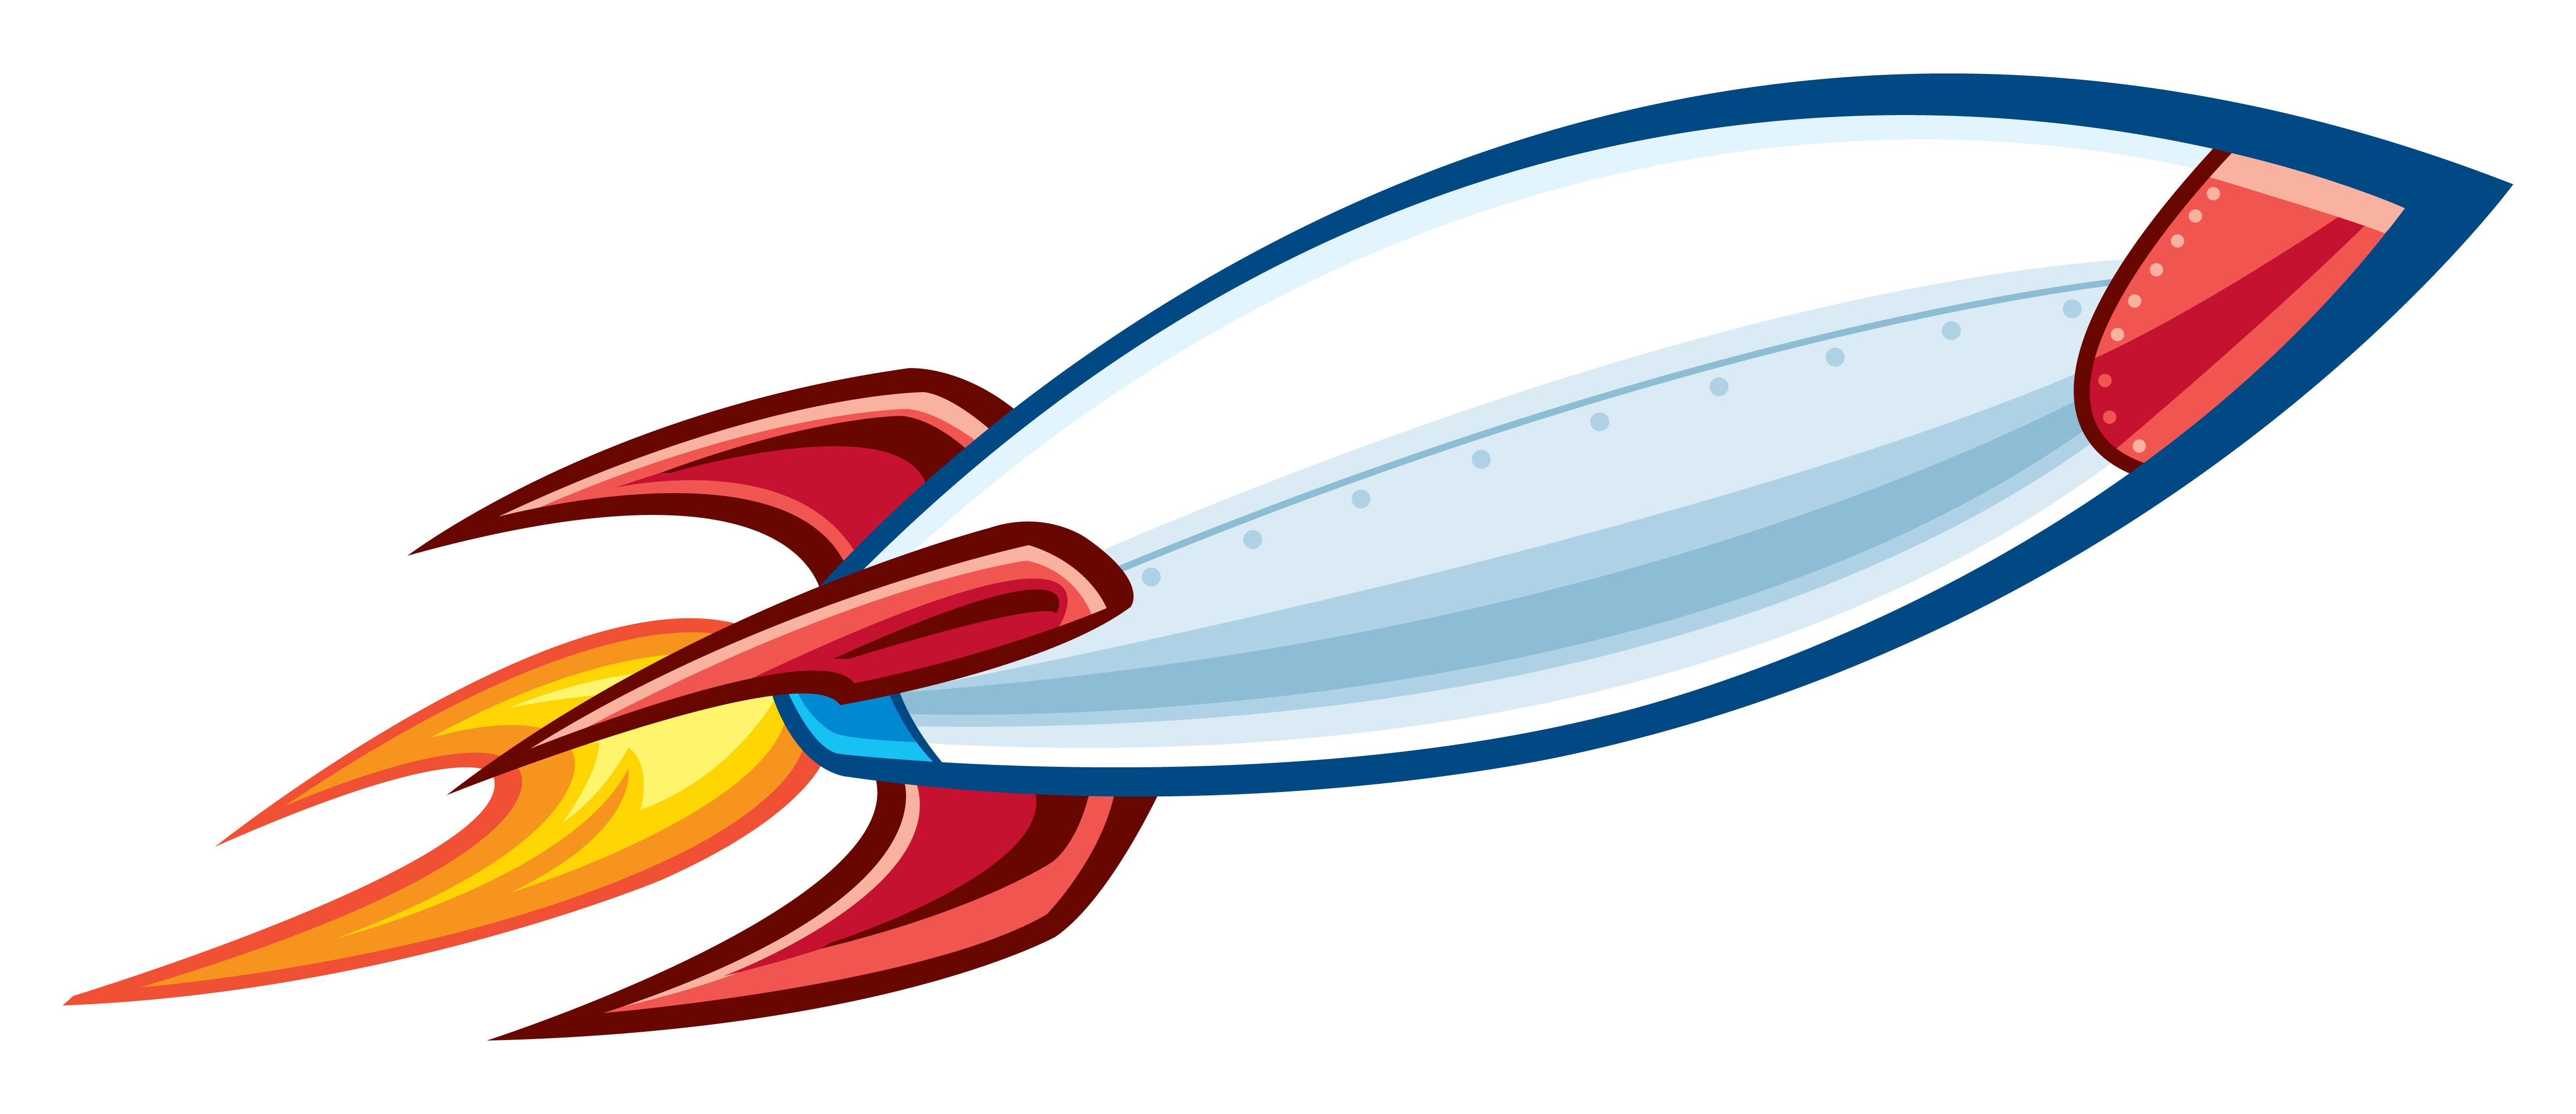 Clipart rocket cool rocket. Ship picture free download